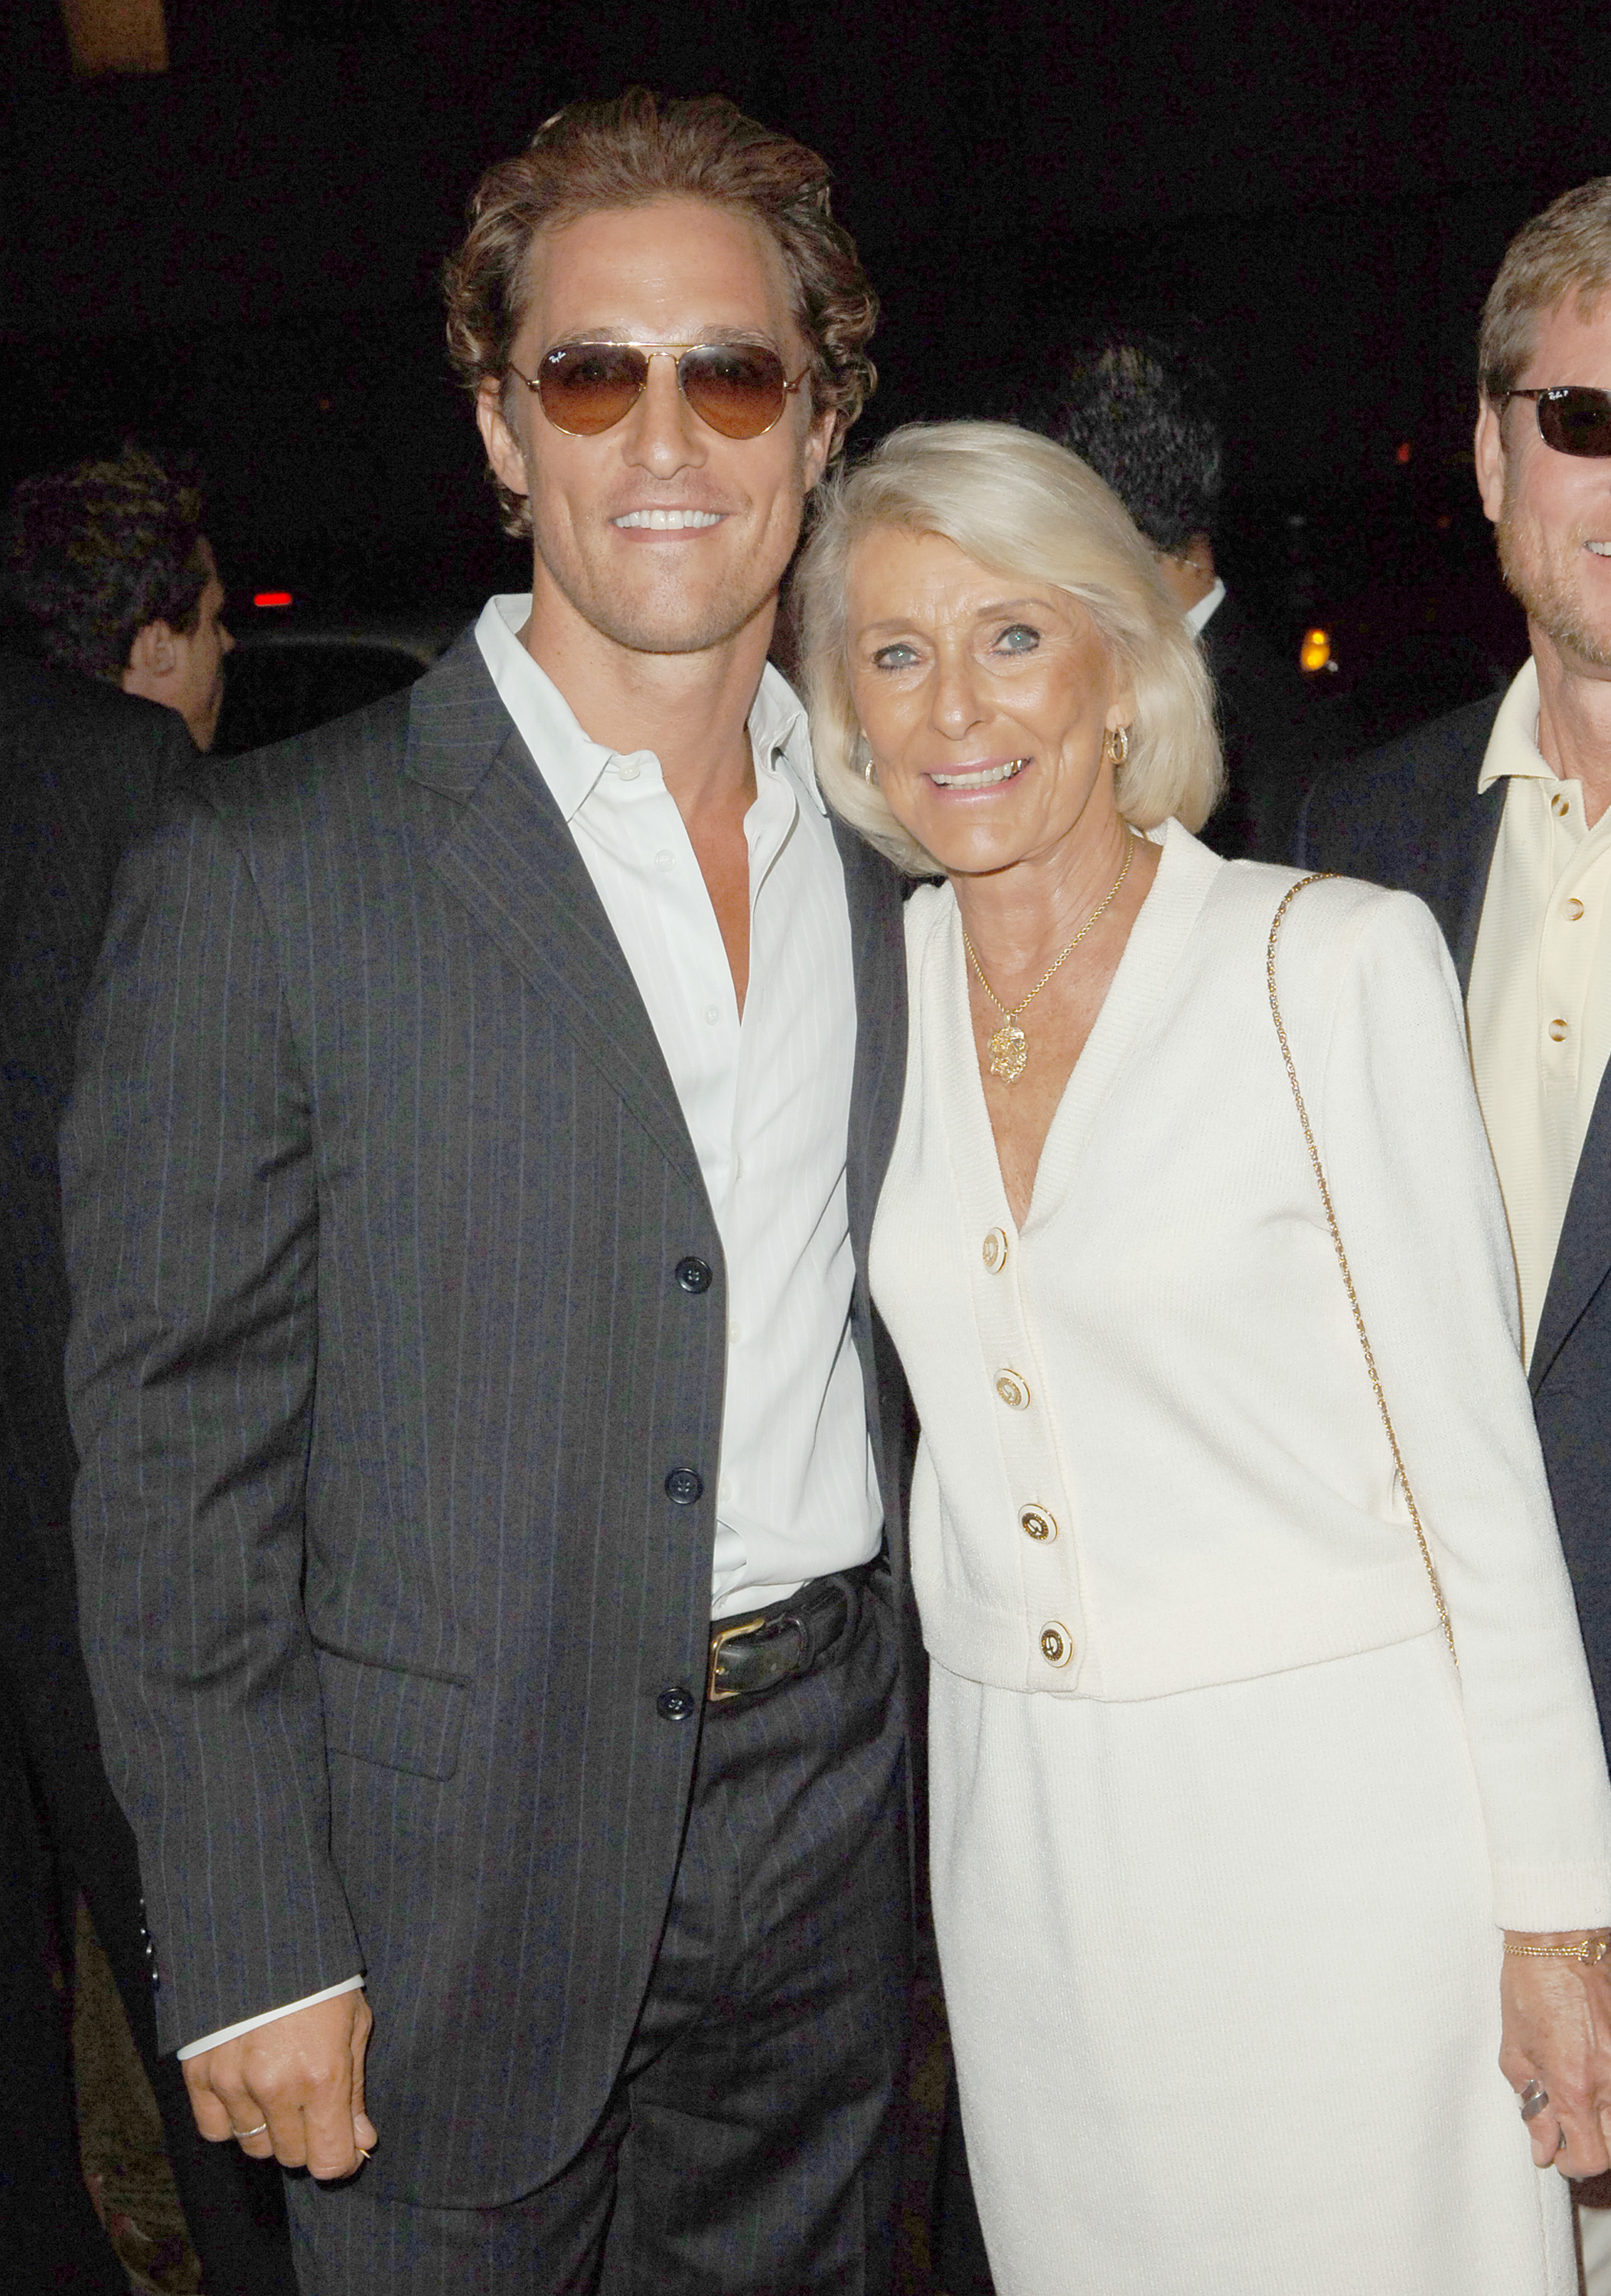 Matthew McConaughey and his mother during the "Two for the Money" Los Angeles premiere in Beverly Hills, California, on September 26, 2005 | Source: Getty Images